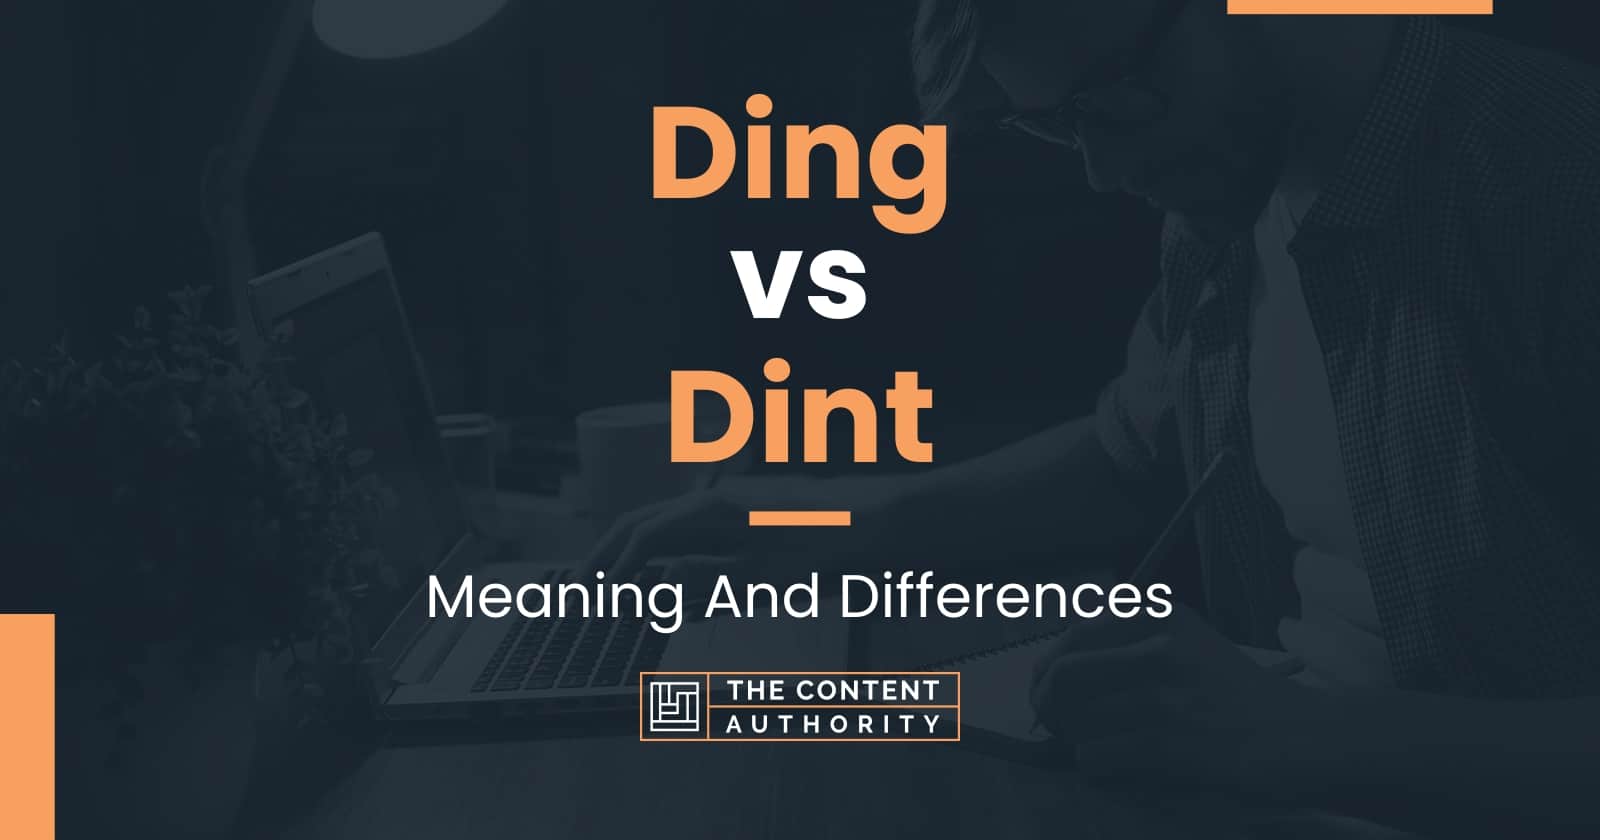 Ding - Definition, Meaning & Synonyms